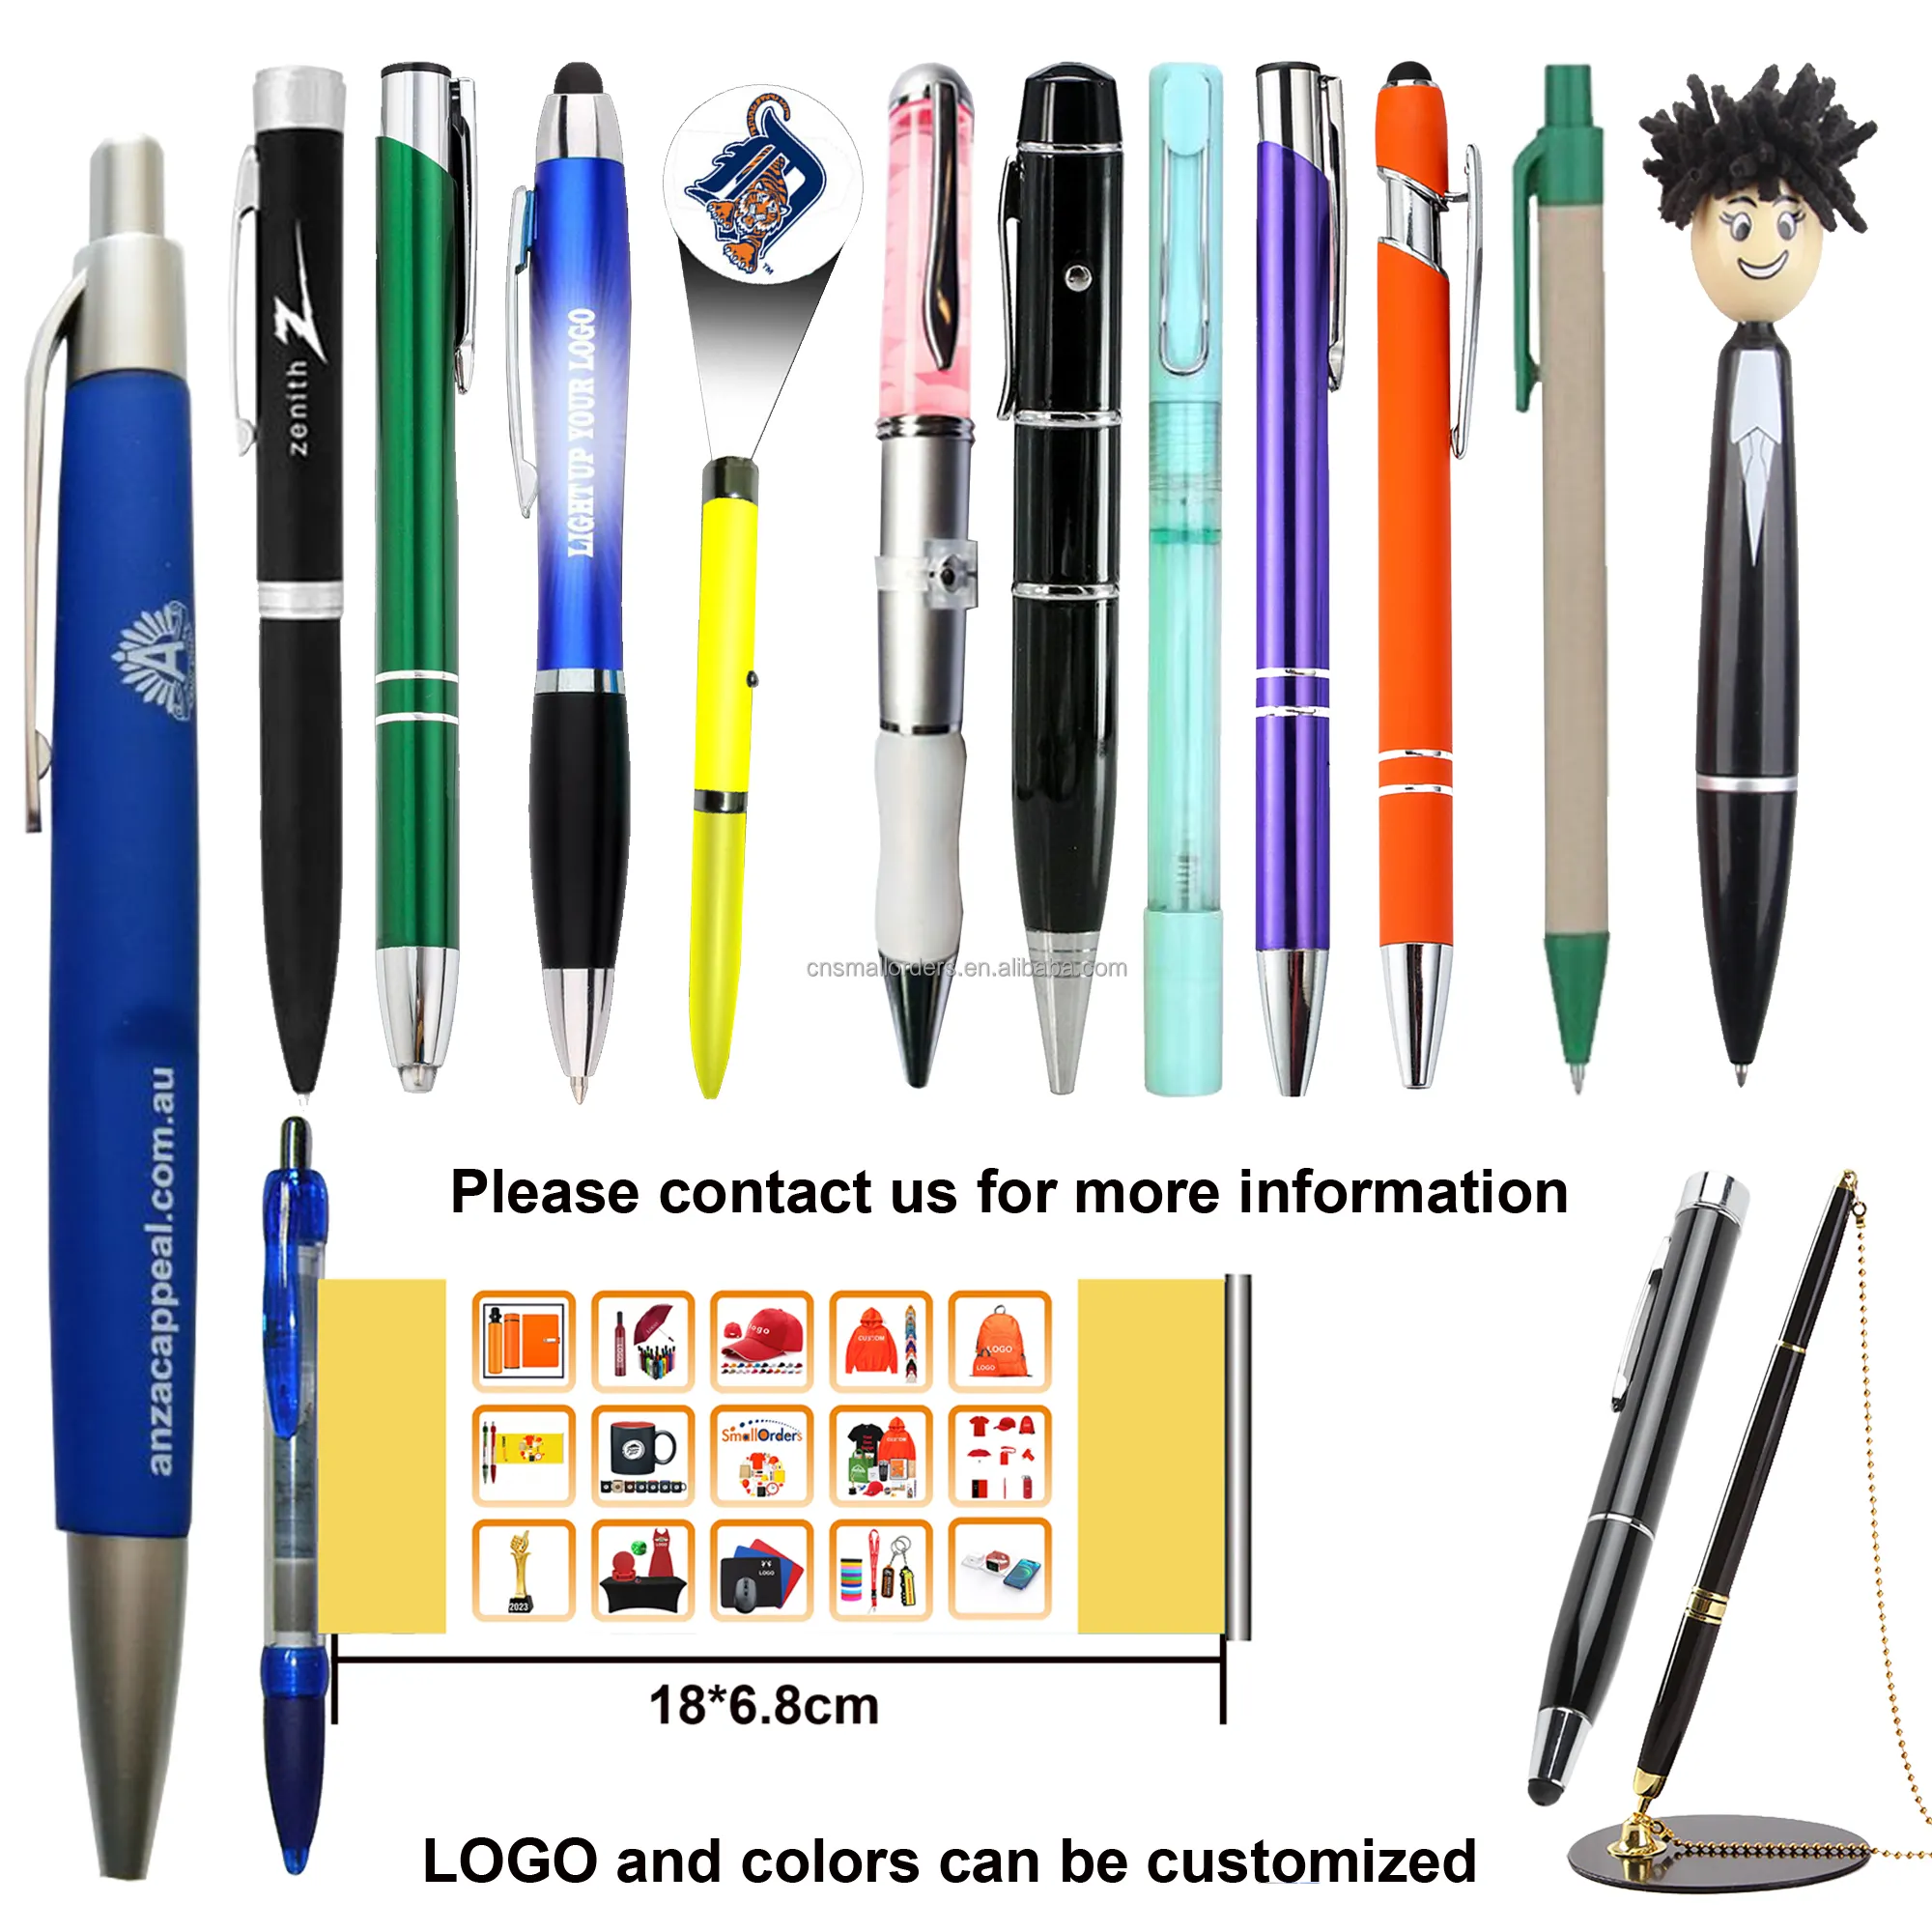 Promotional corporate gift gifts item items pens with custom metal illuminated ballpoint pen with logo light kids novelty pens